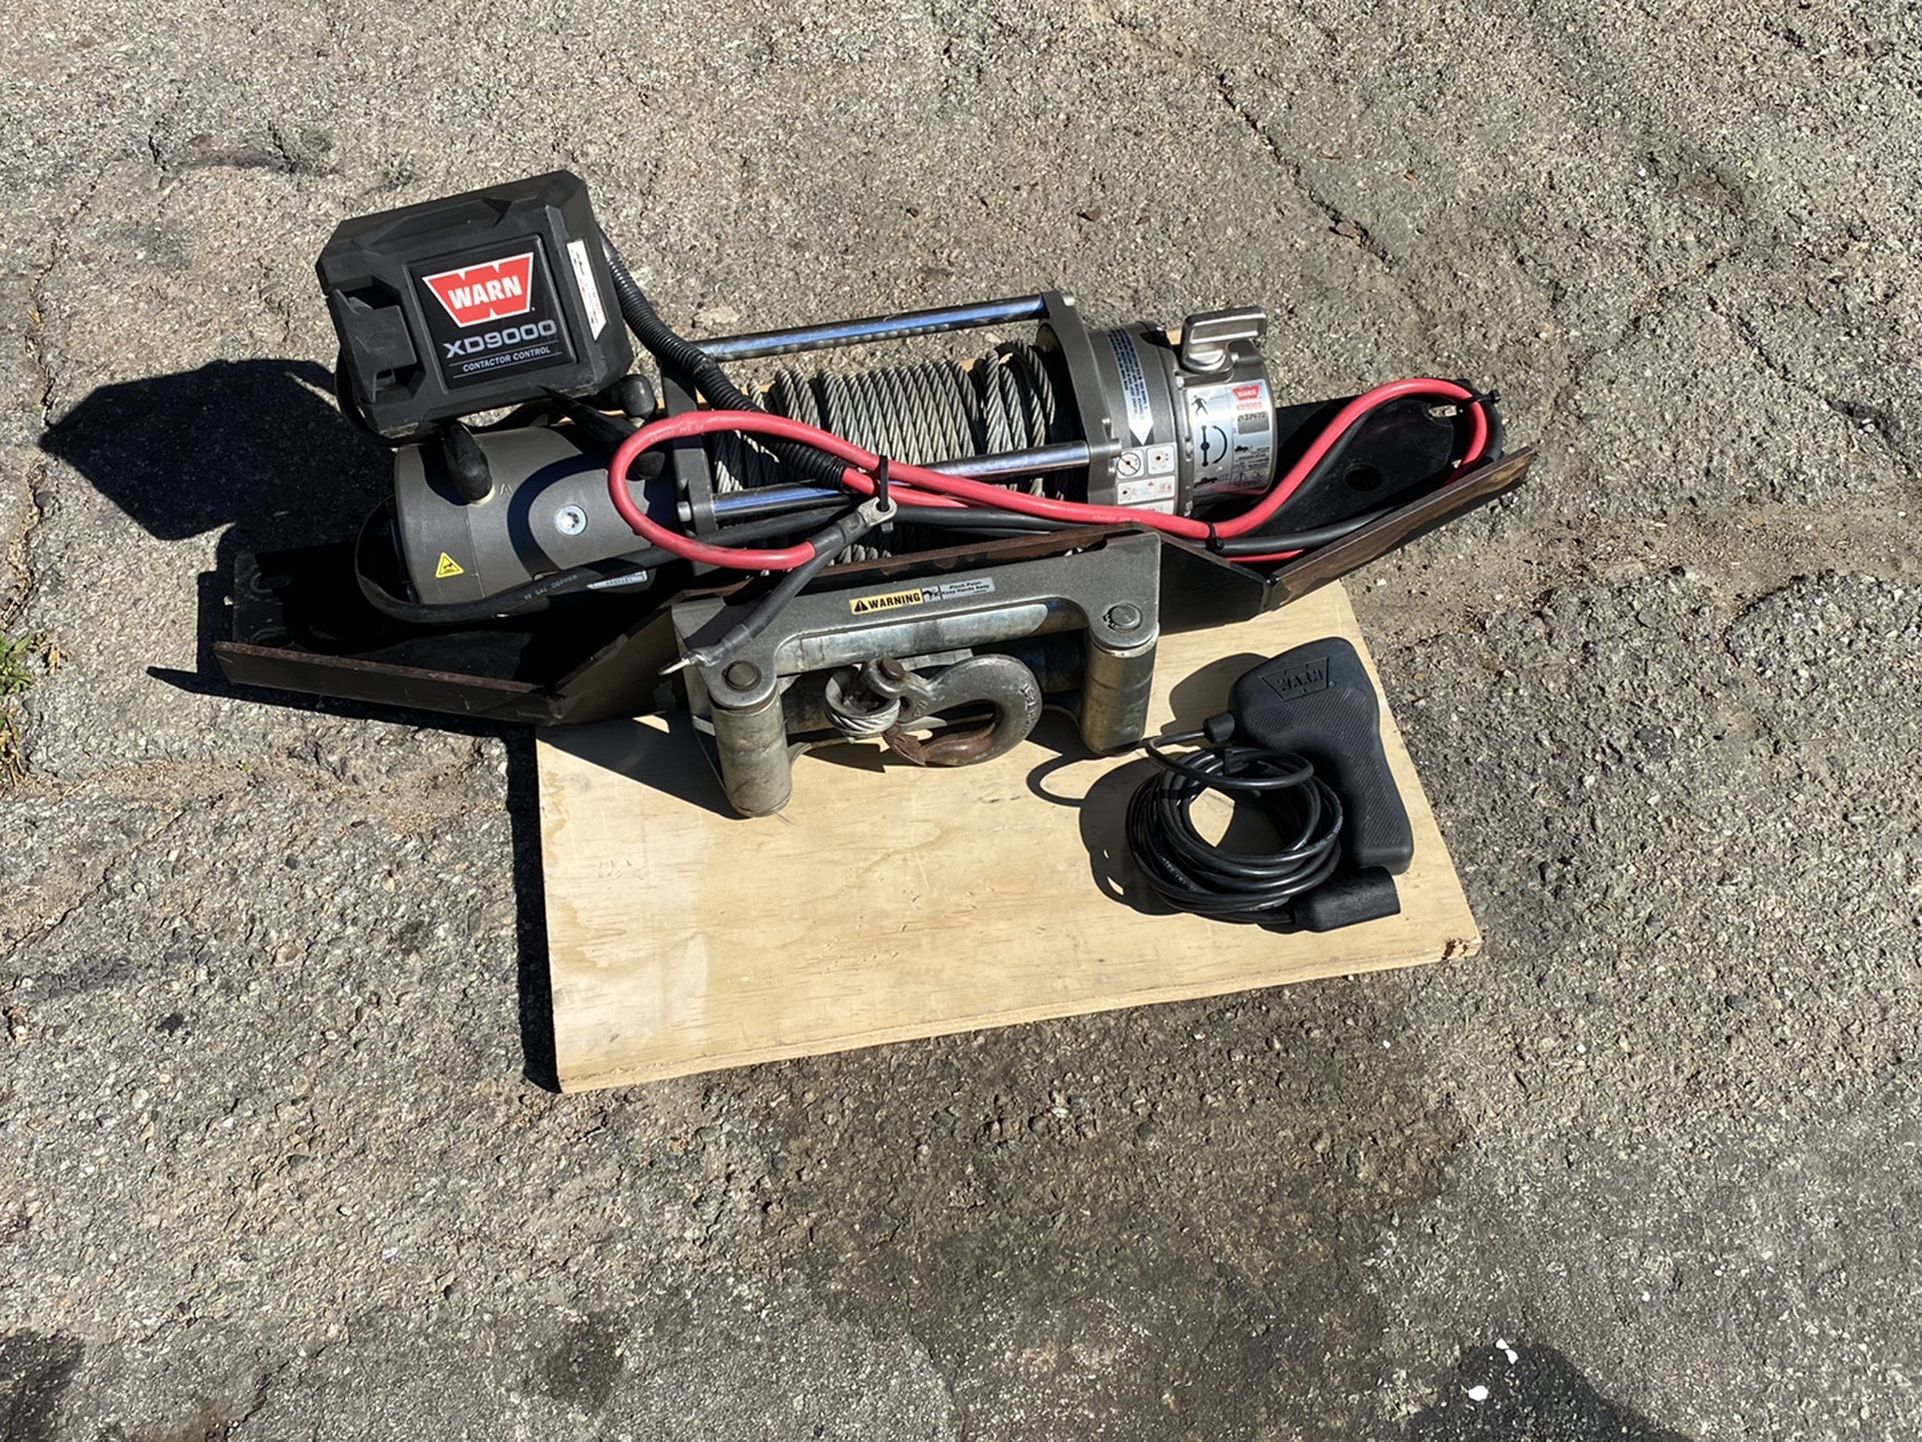 Warn Winch XD 9000 Whit Remout Control Used But Like New